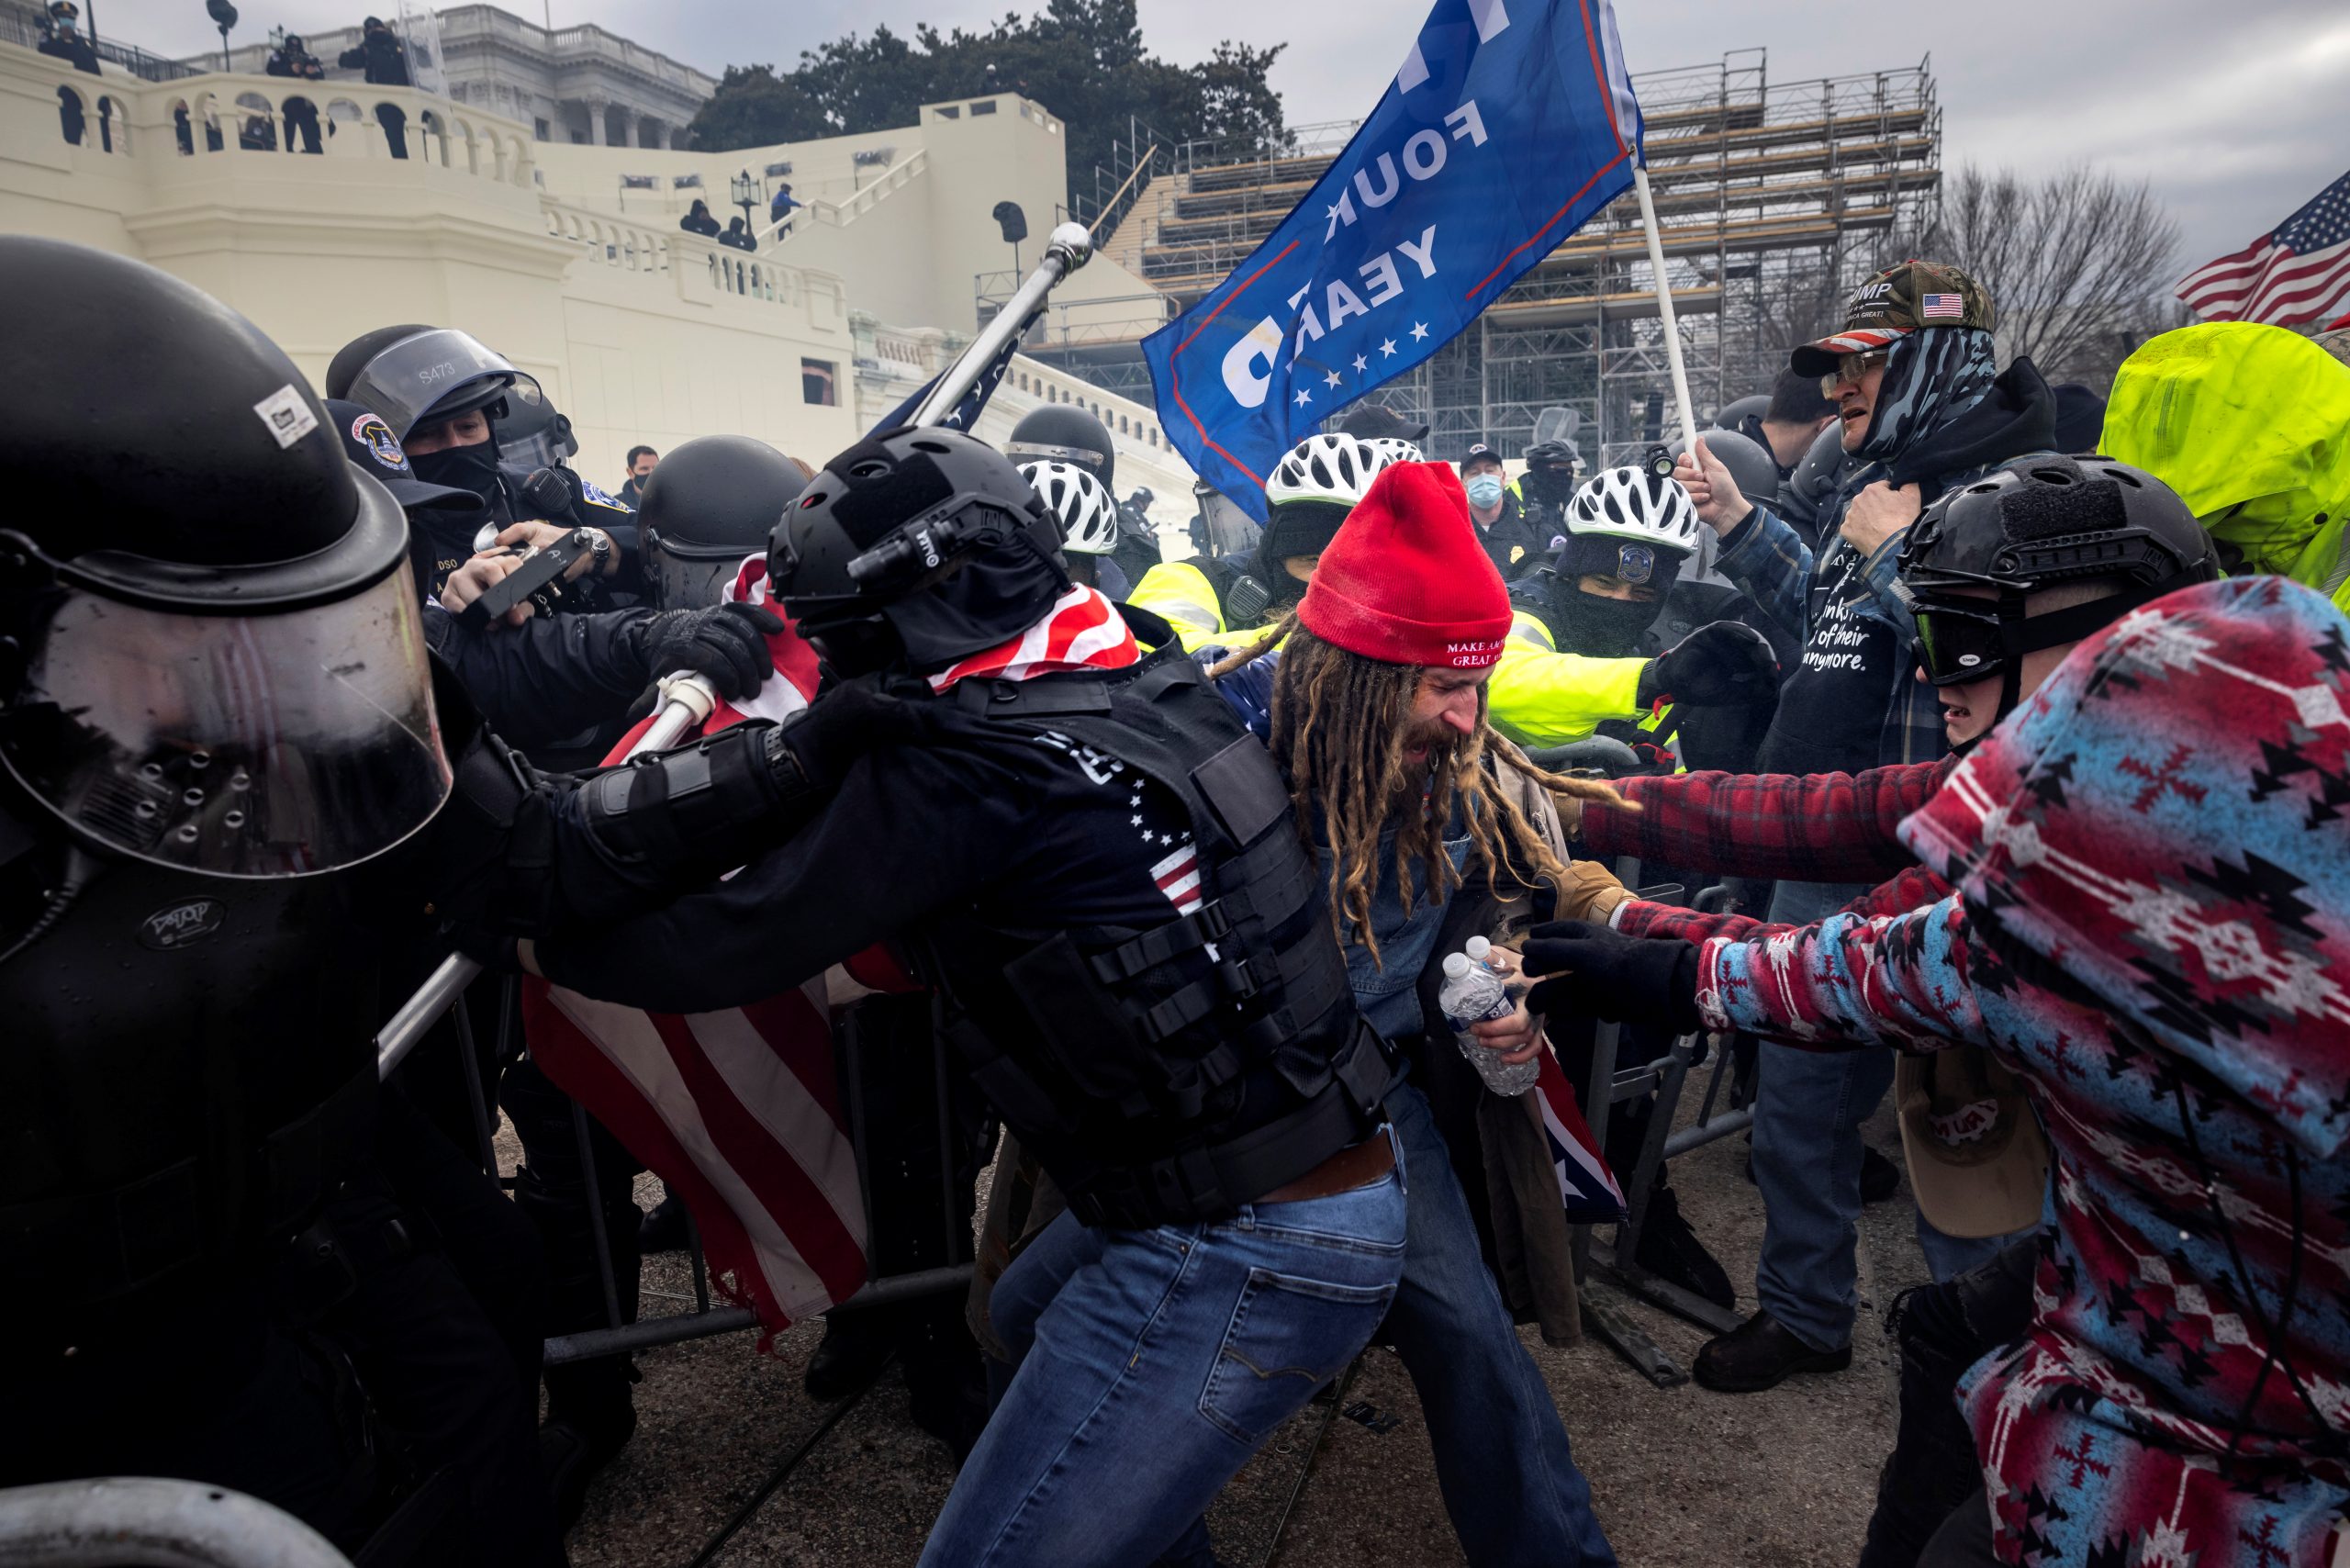 “I don’t trust the people above me”: Riot squad cops open up about disastrous response to Capitol insurrection